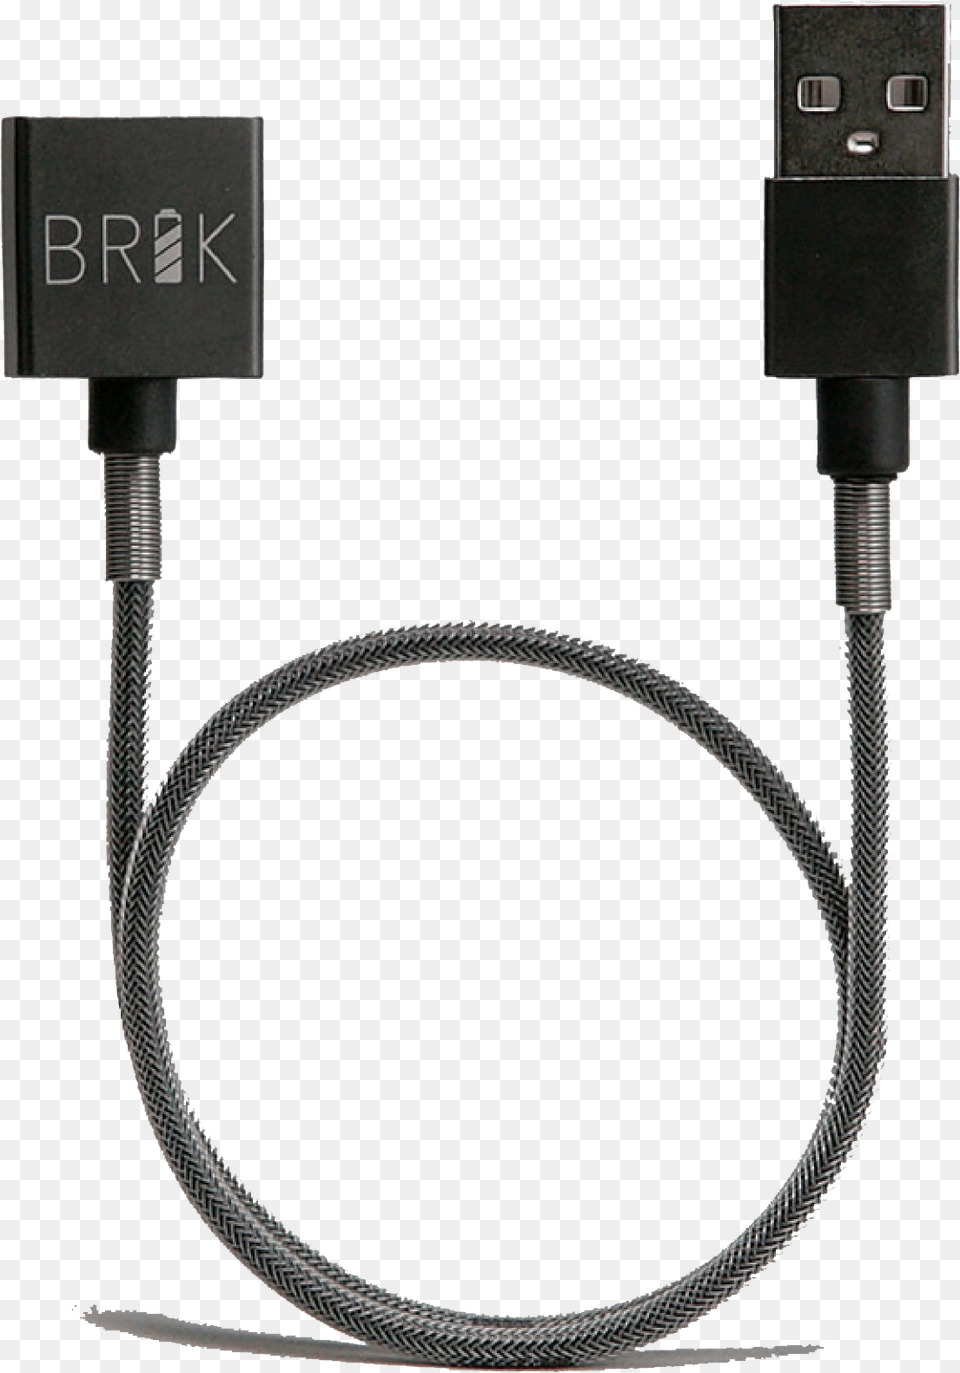 Juul Usb Cable Brik Charging Cables For Juul Vaporizer, Adapter, Electronics, Smoke Pipe Free Png